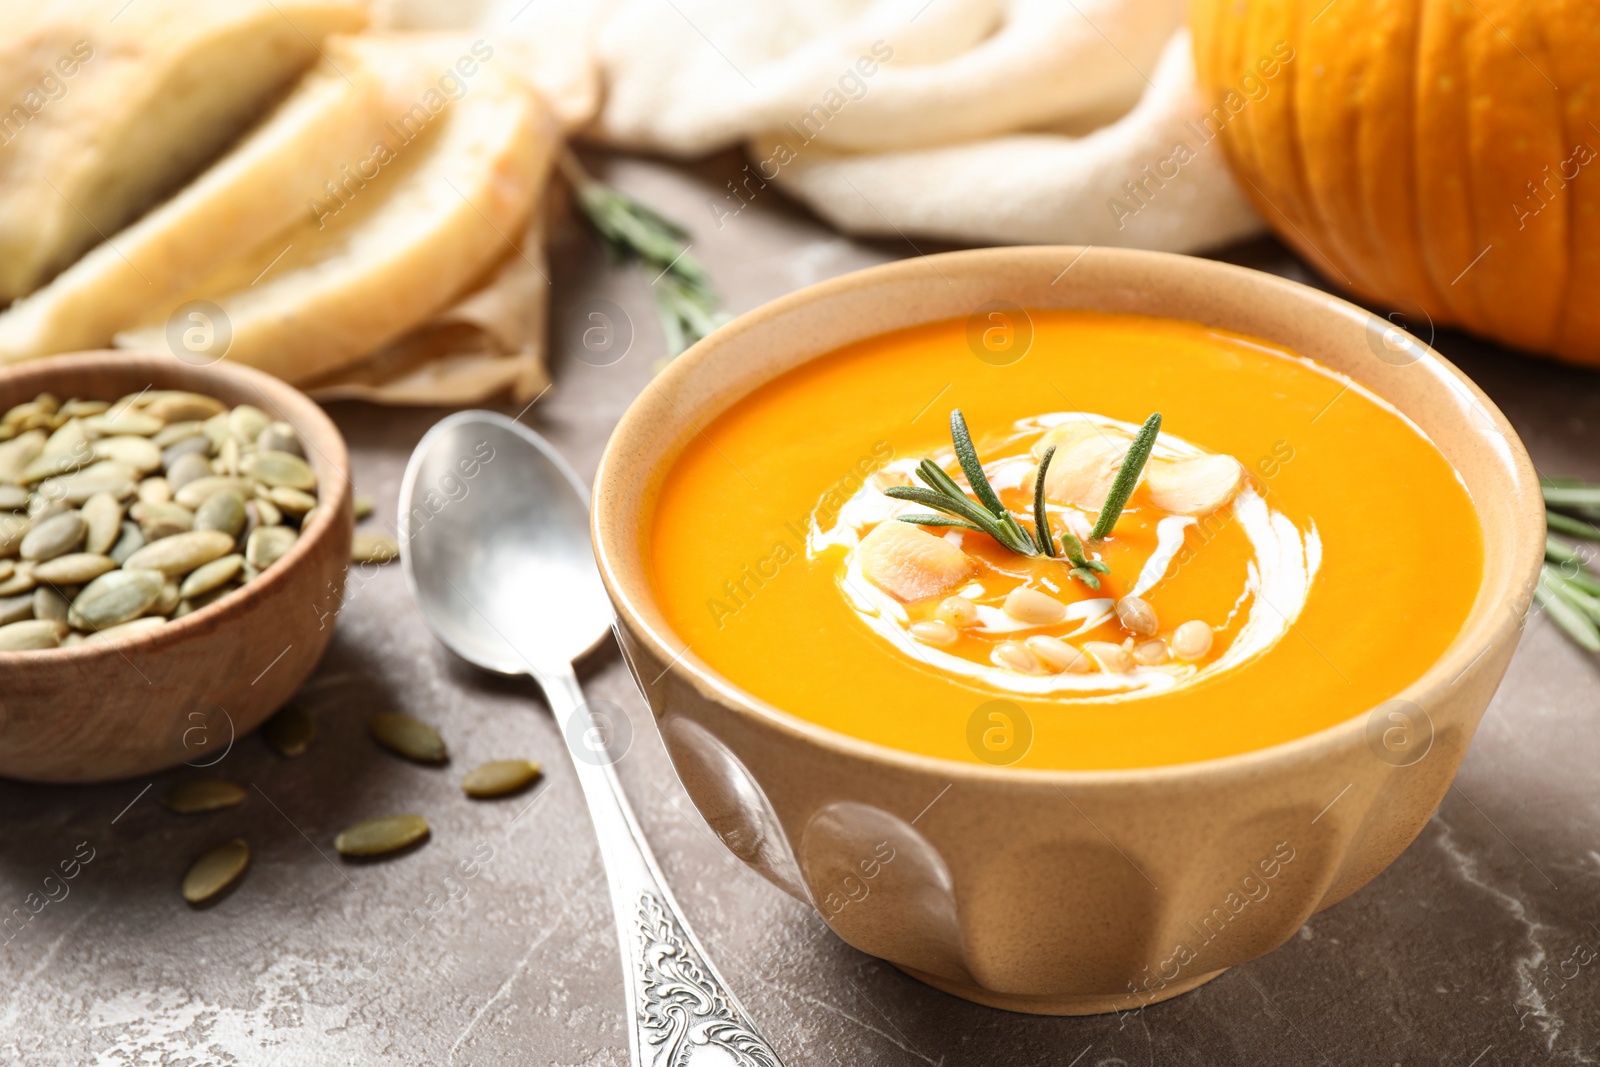 Photo of Delicious pumpkin soup in bowl on marble table